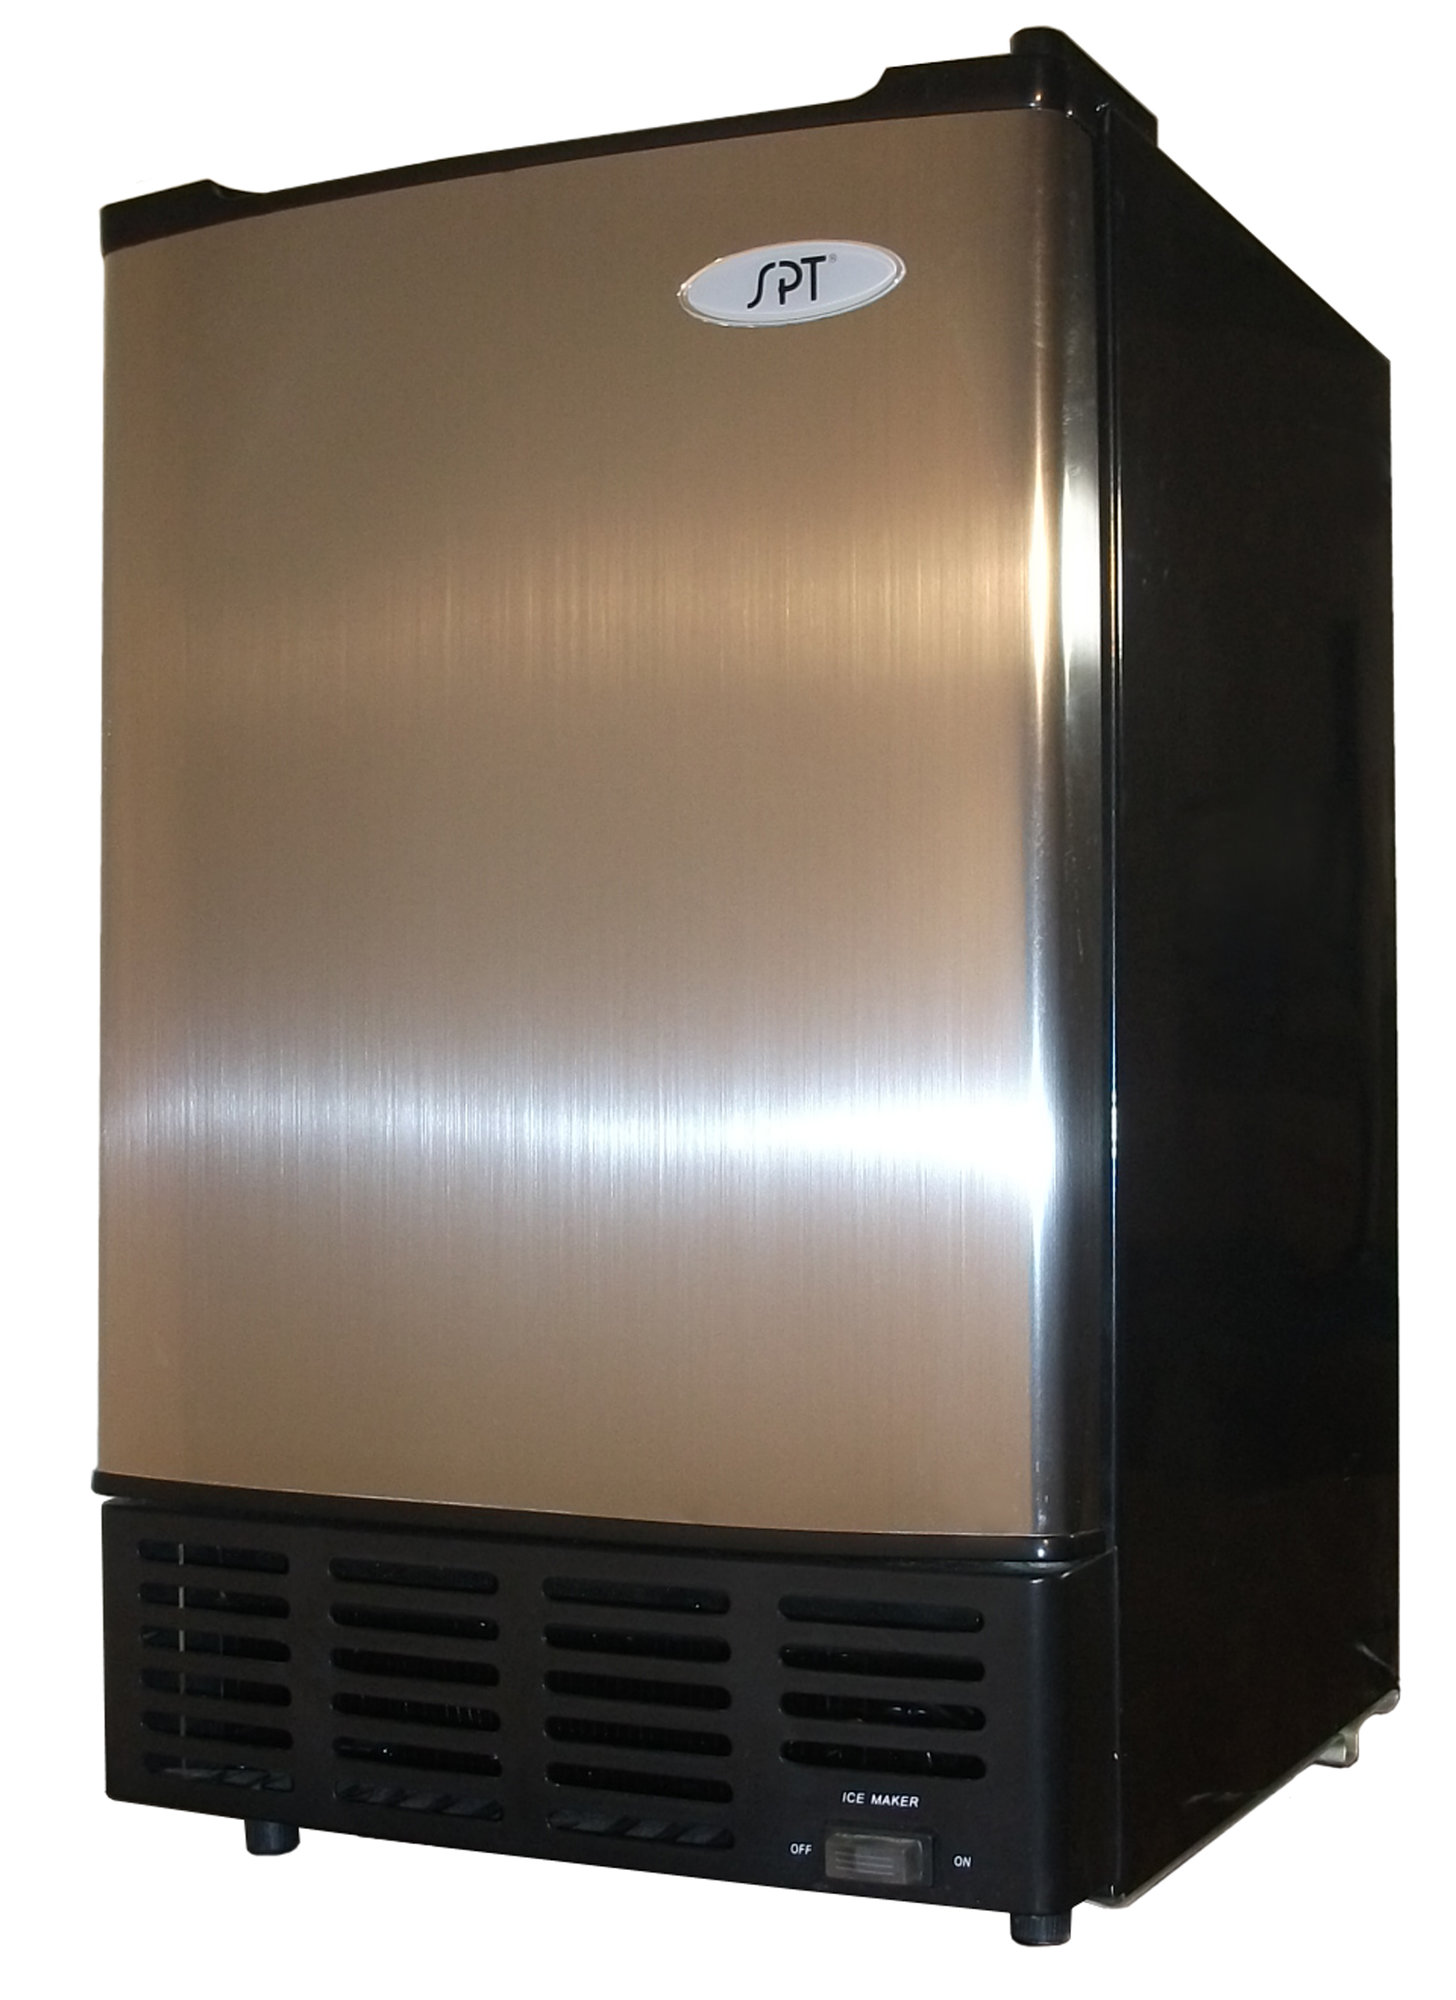 Sunpentown Under-the-Counter Thermo-Electric Ice Maker, Stainless Steel - image 2 of 3